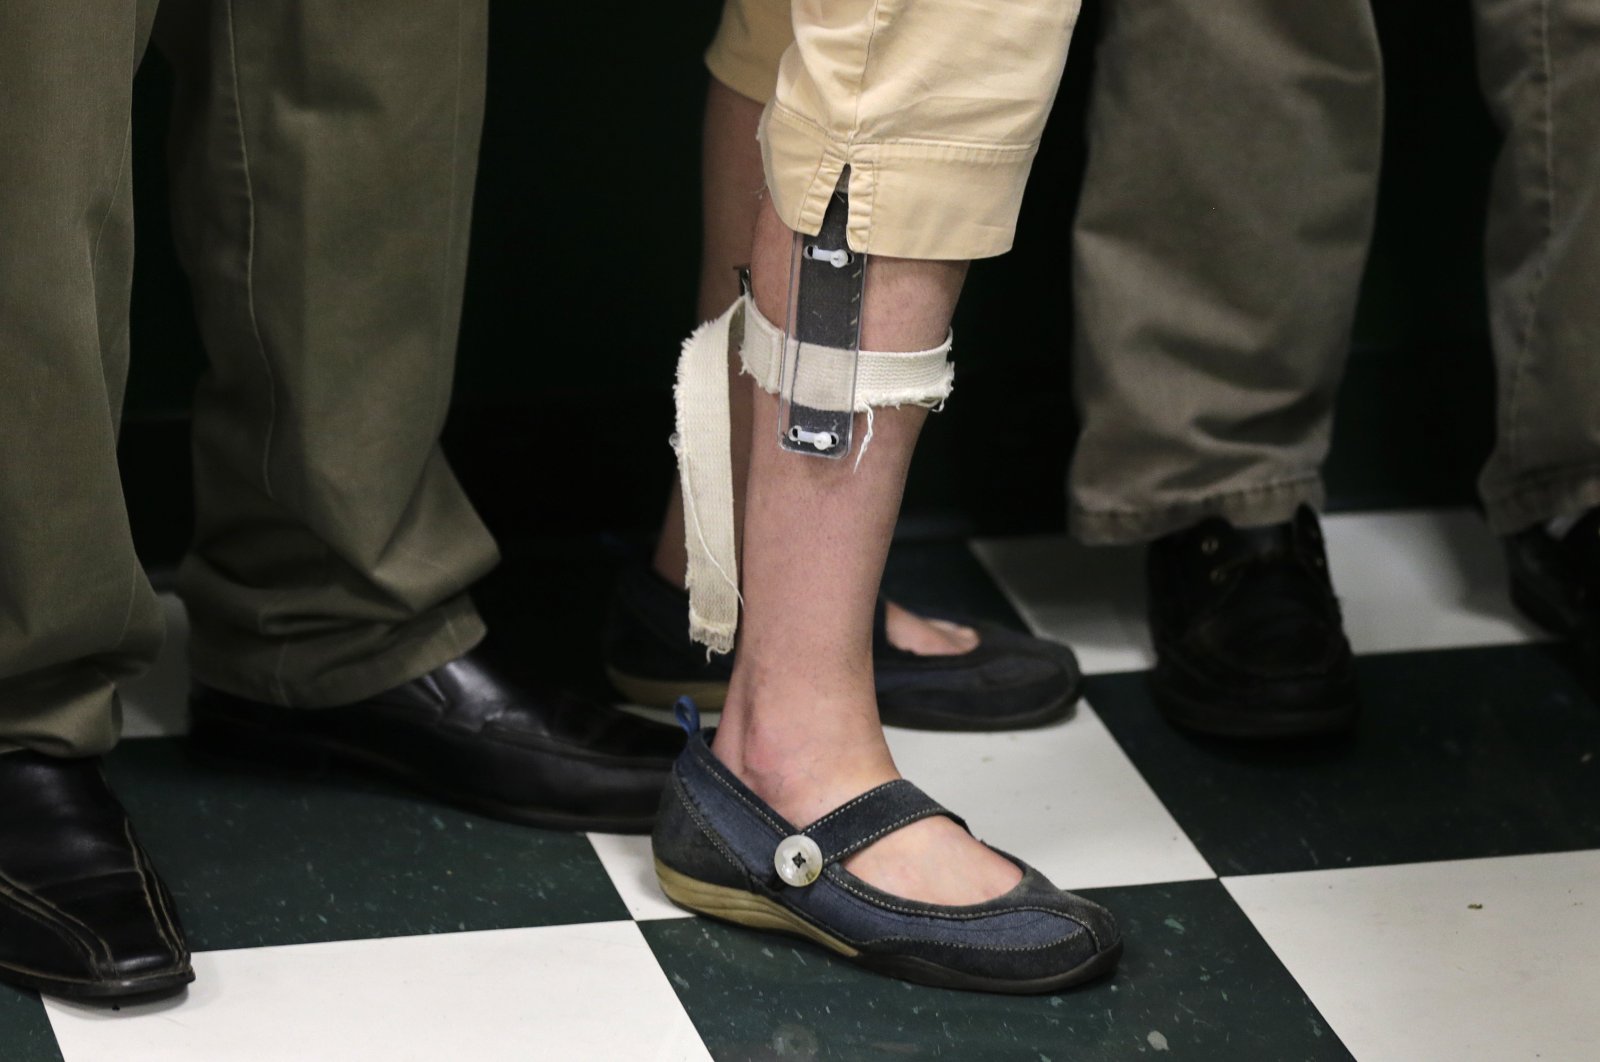 In this Aug. 13, 2014 photo, a female student wearing a shocking device on her leg lines up with classmates after lunch at the Judge Rotenberg Educational Center in Canton, Mass. (AP Photo)